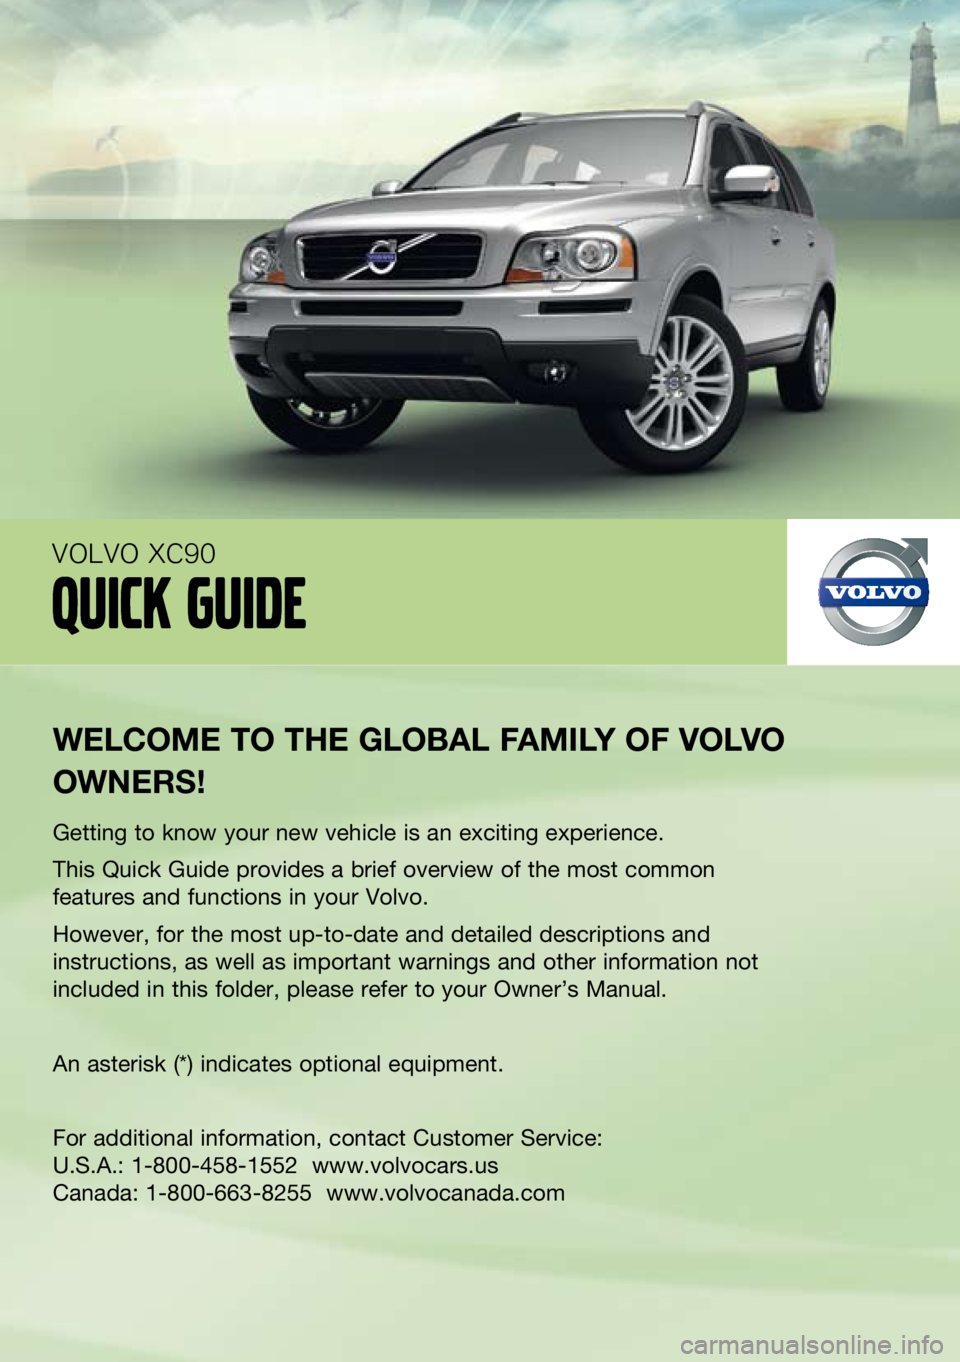 VOLVO XC90 2012  Quick Guide 
welcome to the  global F amily oF  volvo 
owners !
Getting to know your new vehicle is an exciting experience.
This Quick Guide provides a brief overview of the most common 
features and functions in